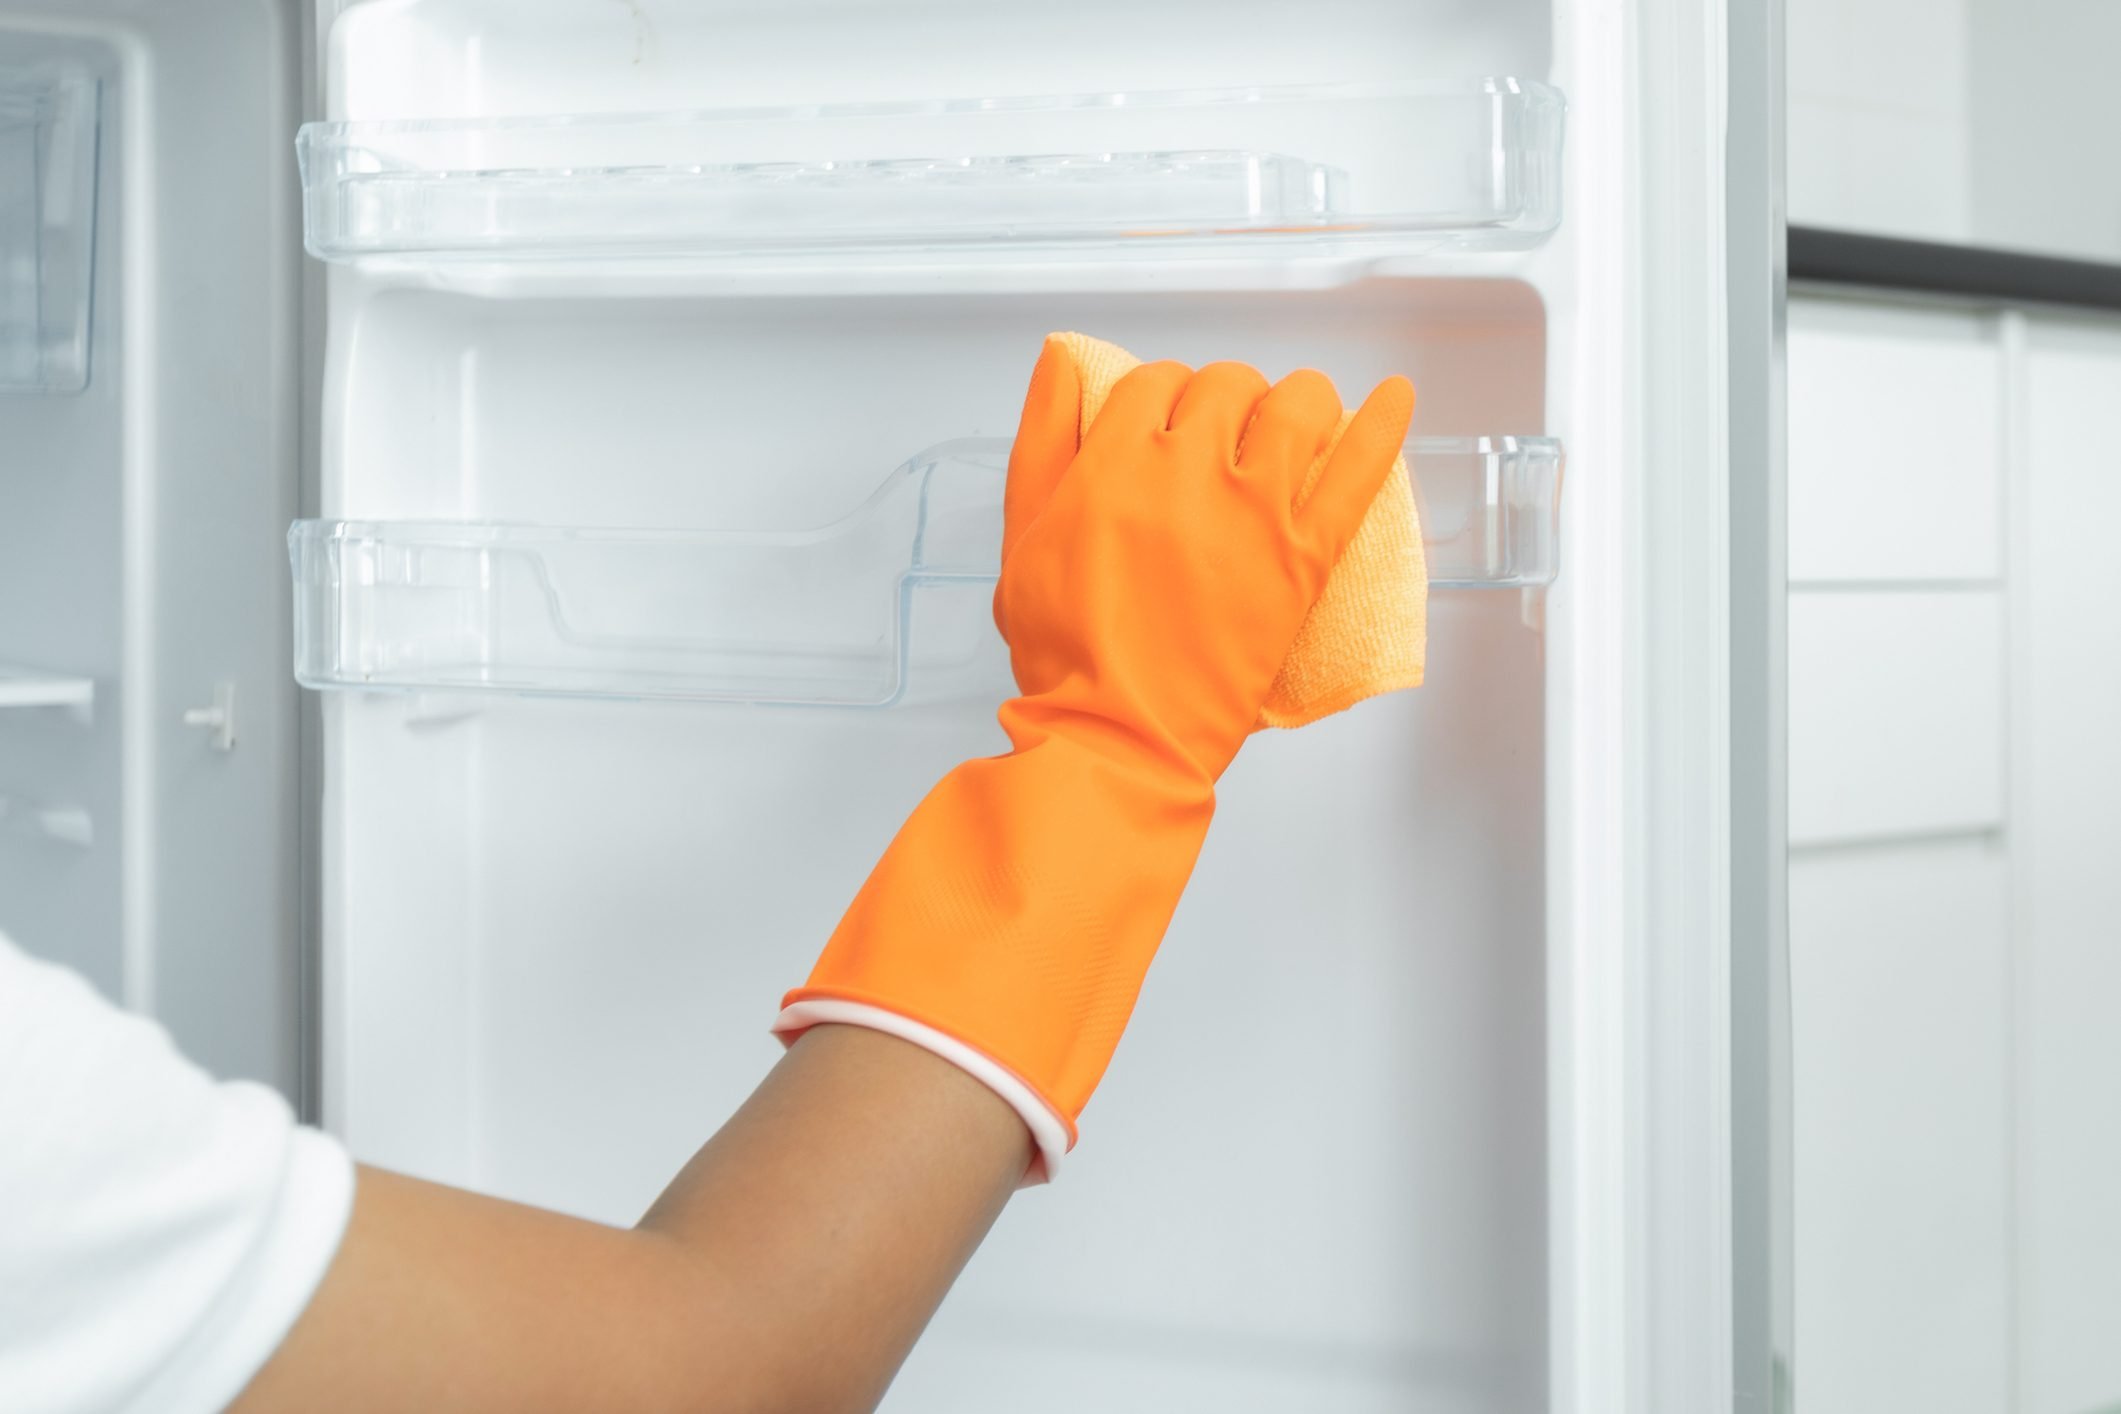 5 Refrigerator Cleaning Hacks To Try Before Hosting Another Event